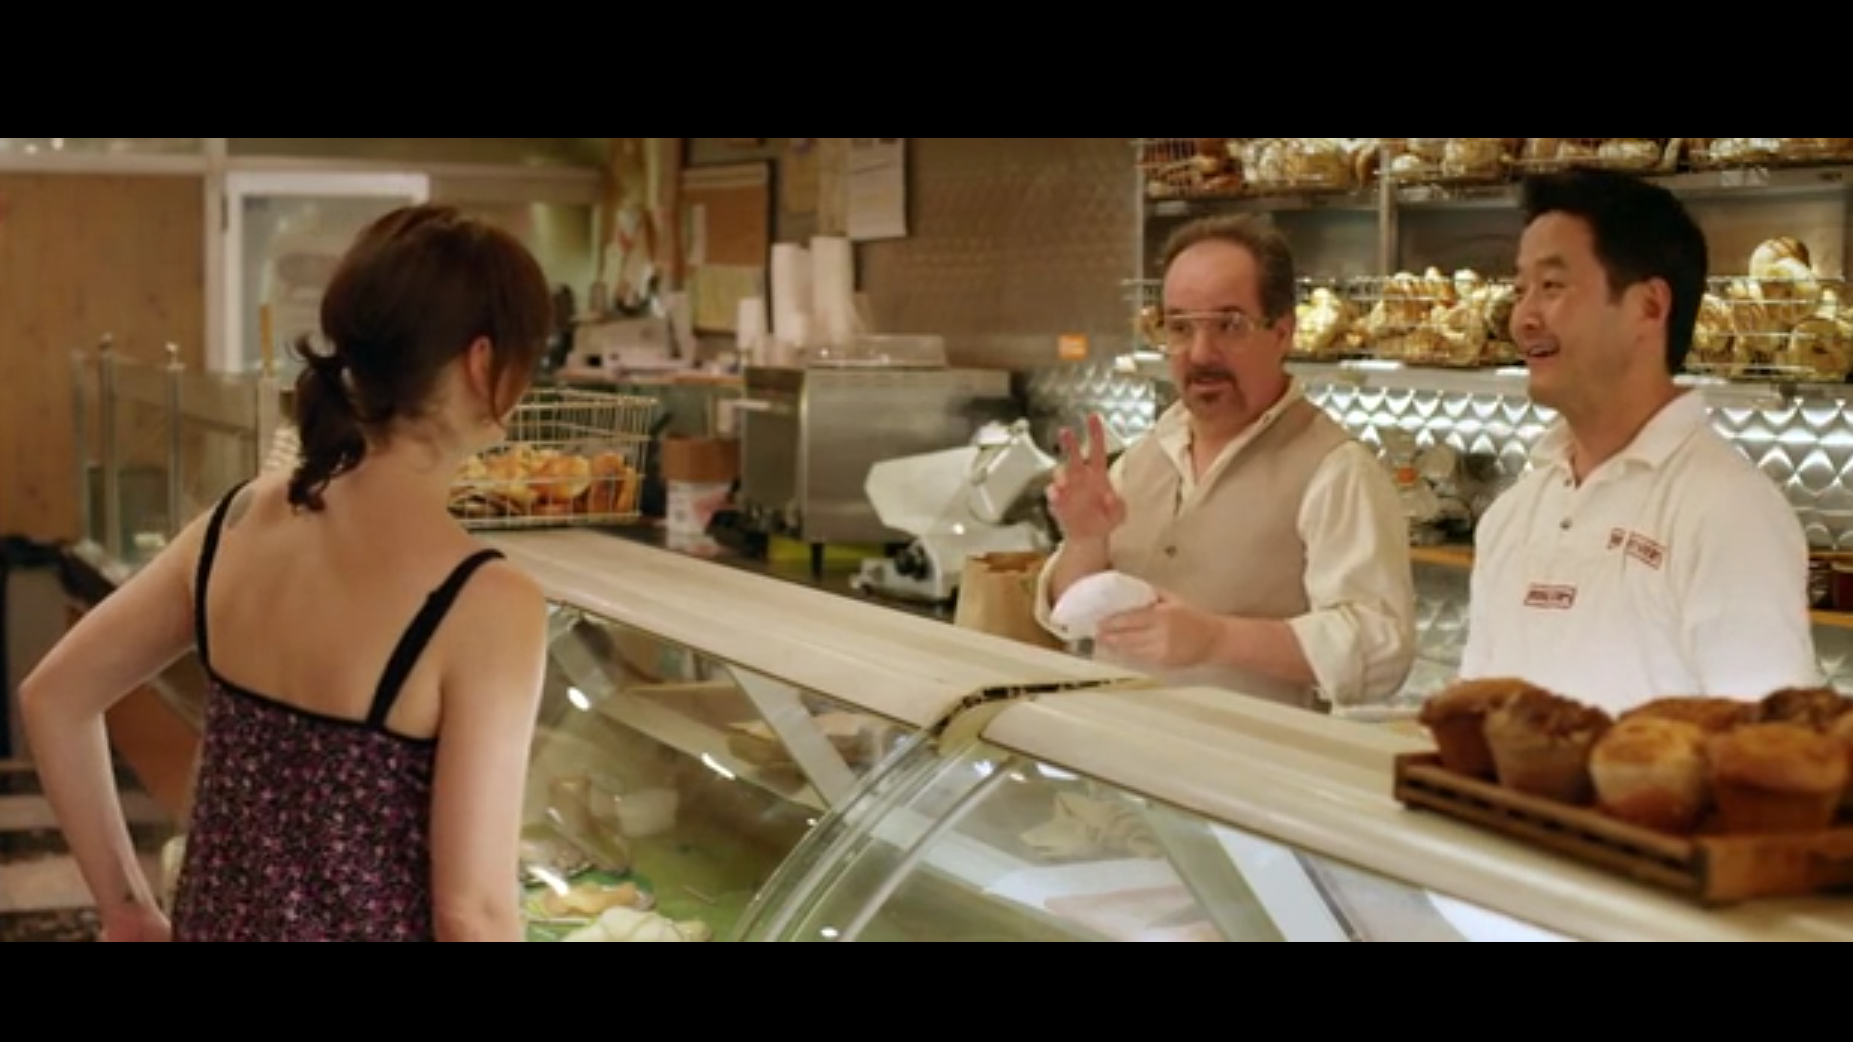 A woman in a deli interacts with two men working behind the counter.